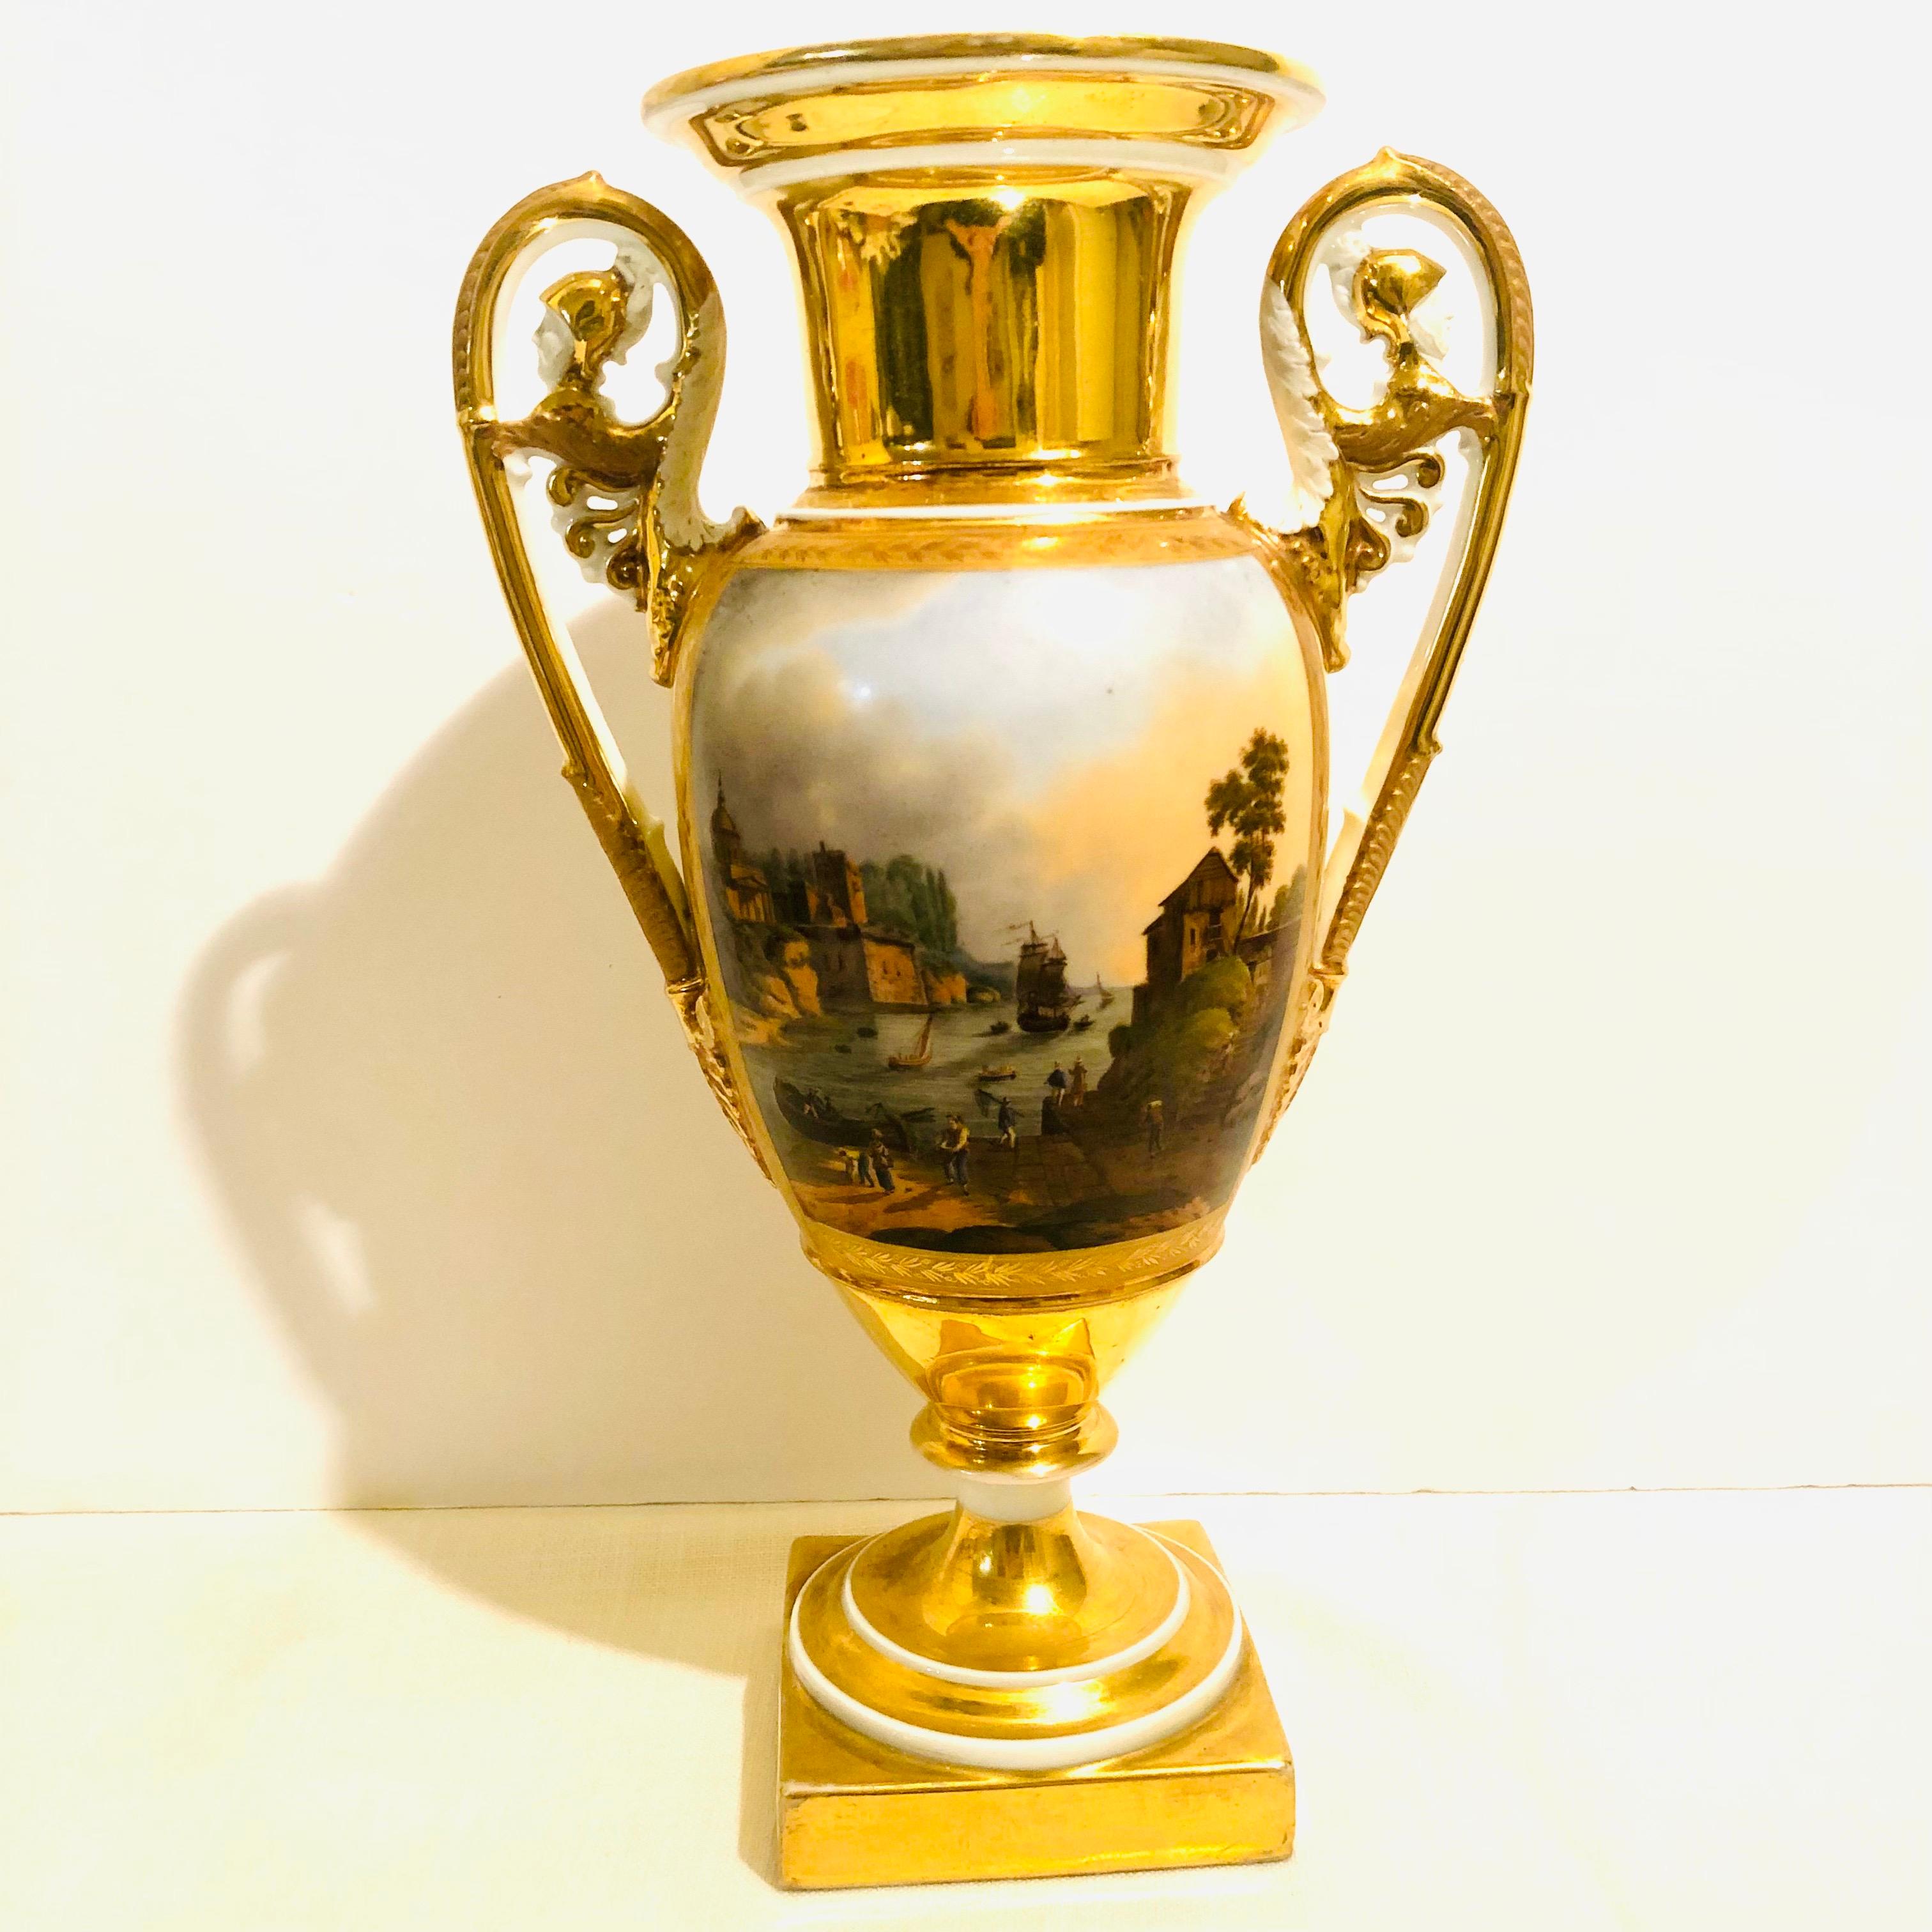 Neoclassical Old Paris Porcelain Vase Painted with Seascape and a Woman and Man on a Row Boat For Sale